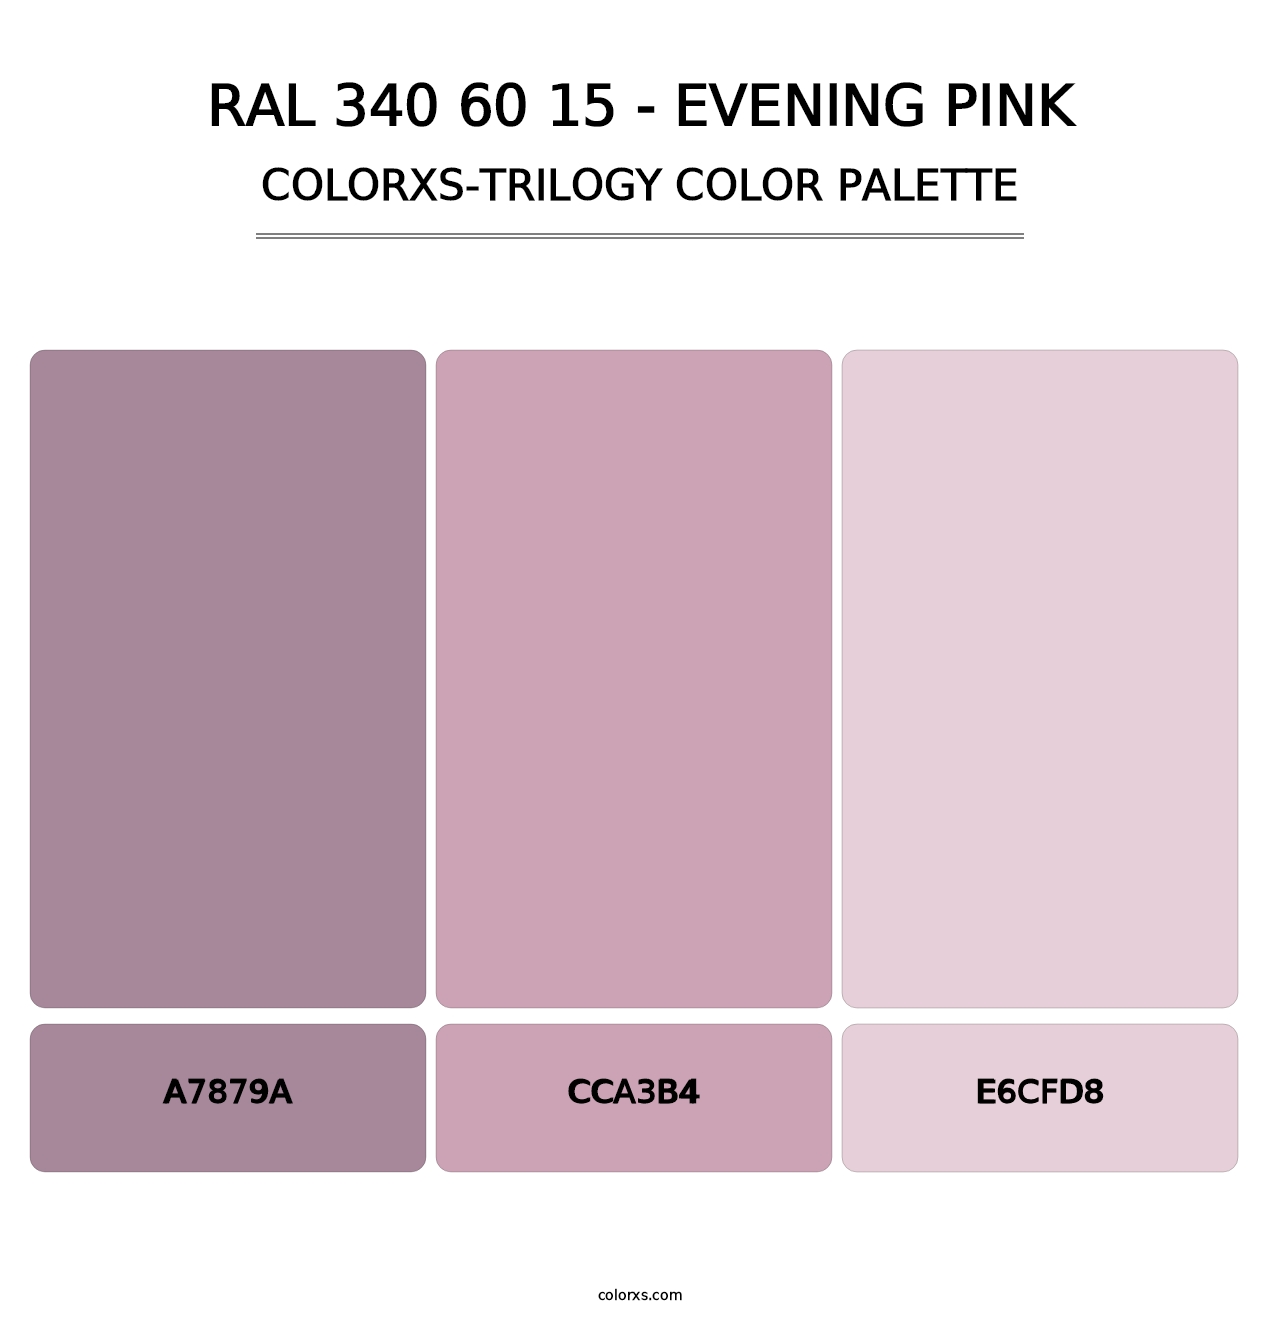 RAL 340 60 15 - Evening Pink - Colorxs Trilogy Palette